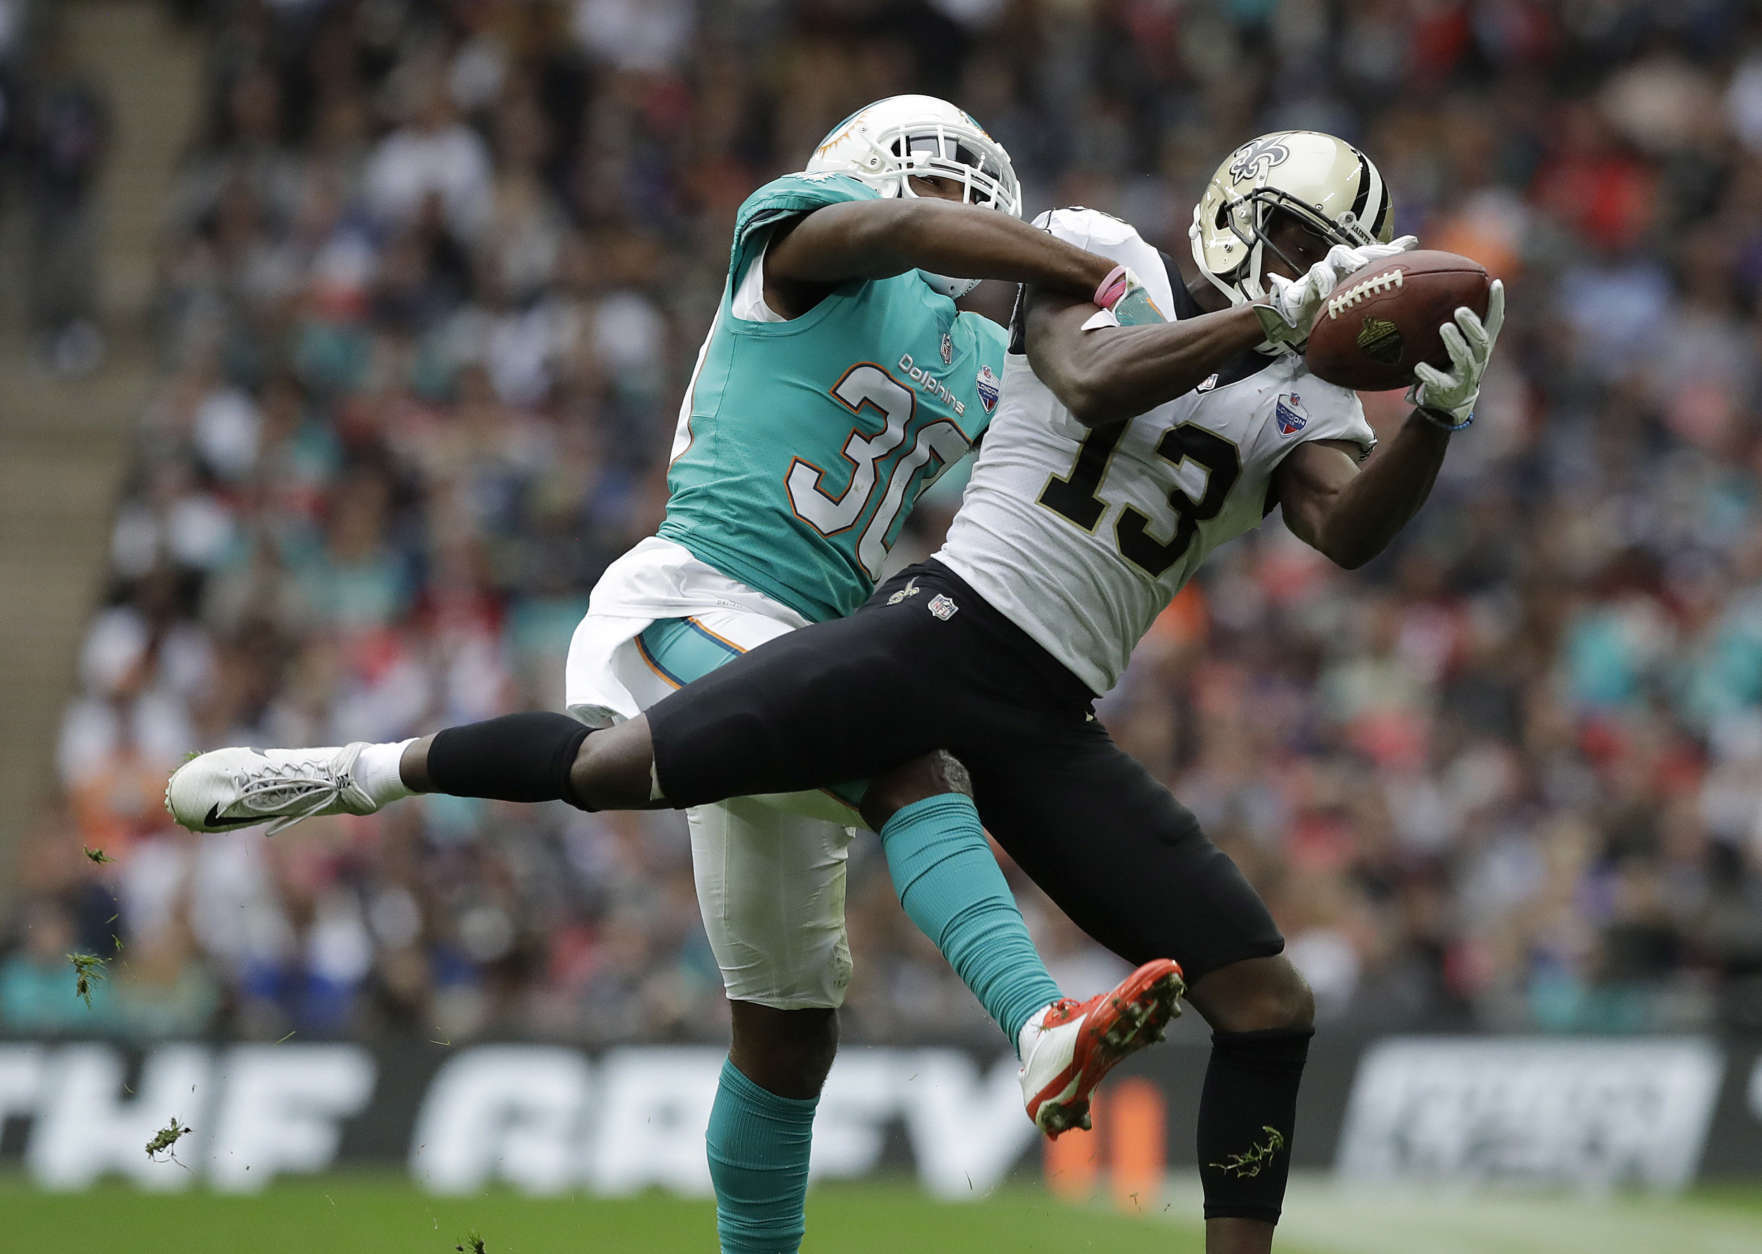 New Orleans Saints wide receiver Michael Thomas (13) catches a pass in front of Miami Dolphins cornerback Cordrea Tankersley (30) during the first half of an NFL football game at Wembley Stadium in London, Sunday Oct. 1, 2017. (AP Photo/Matt Dunham)